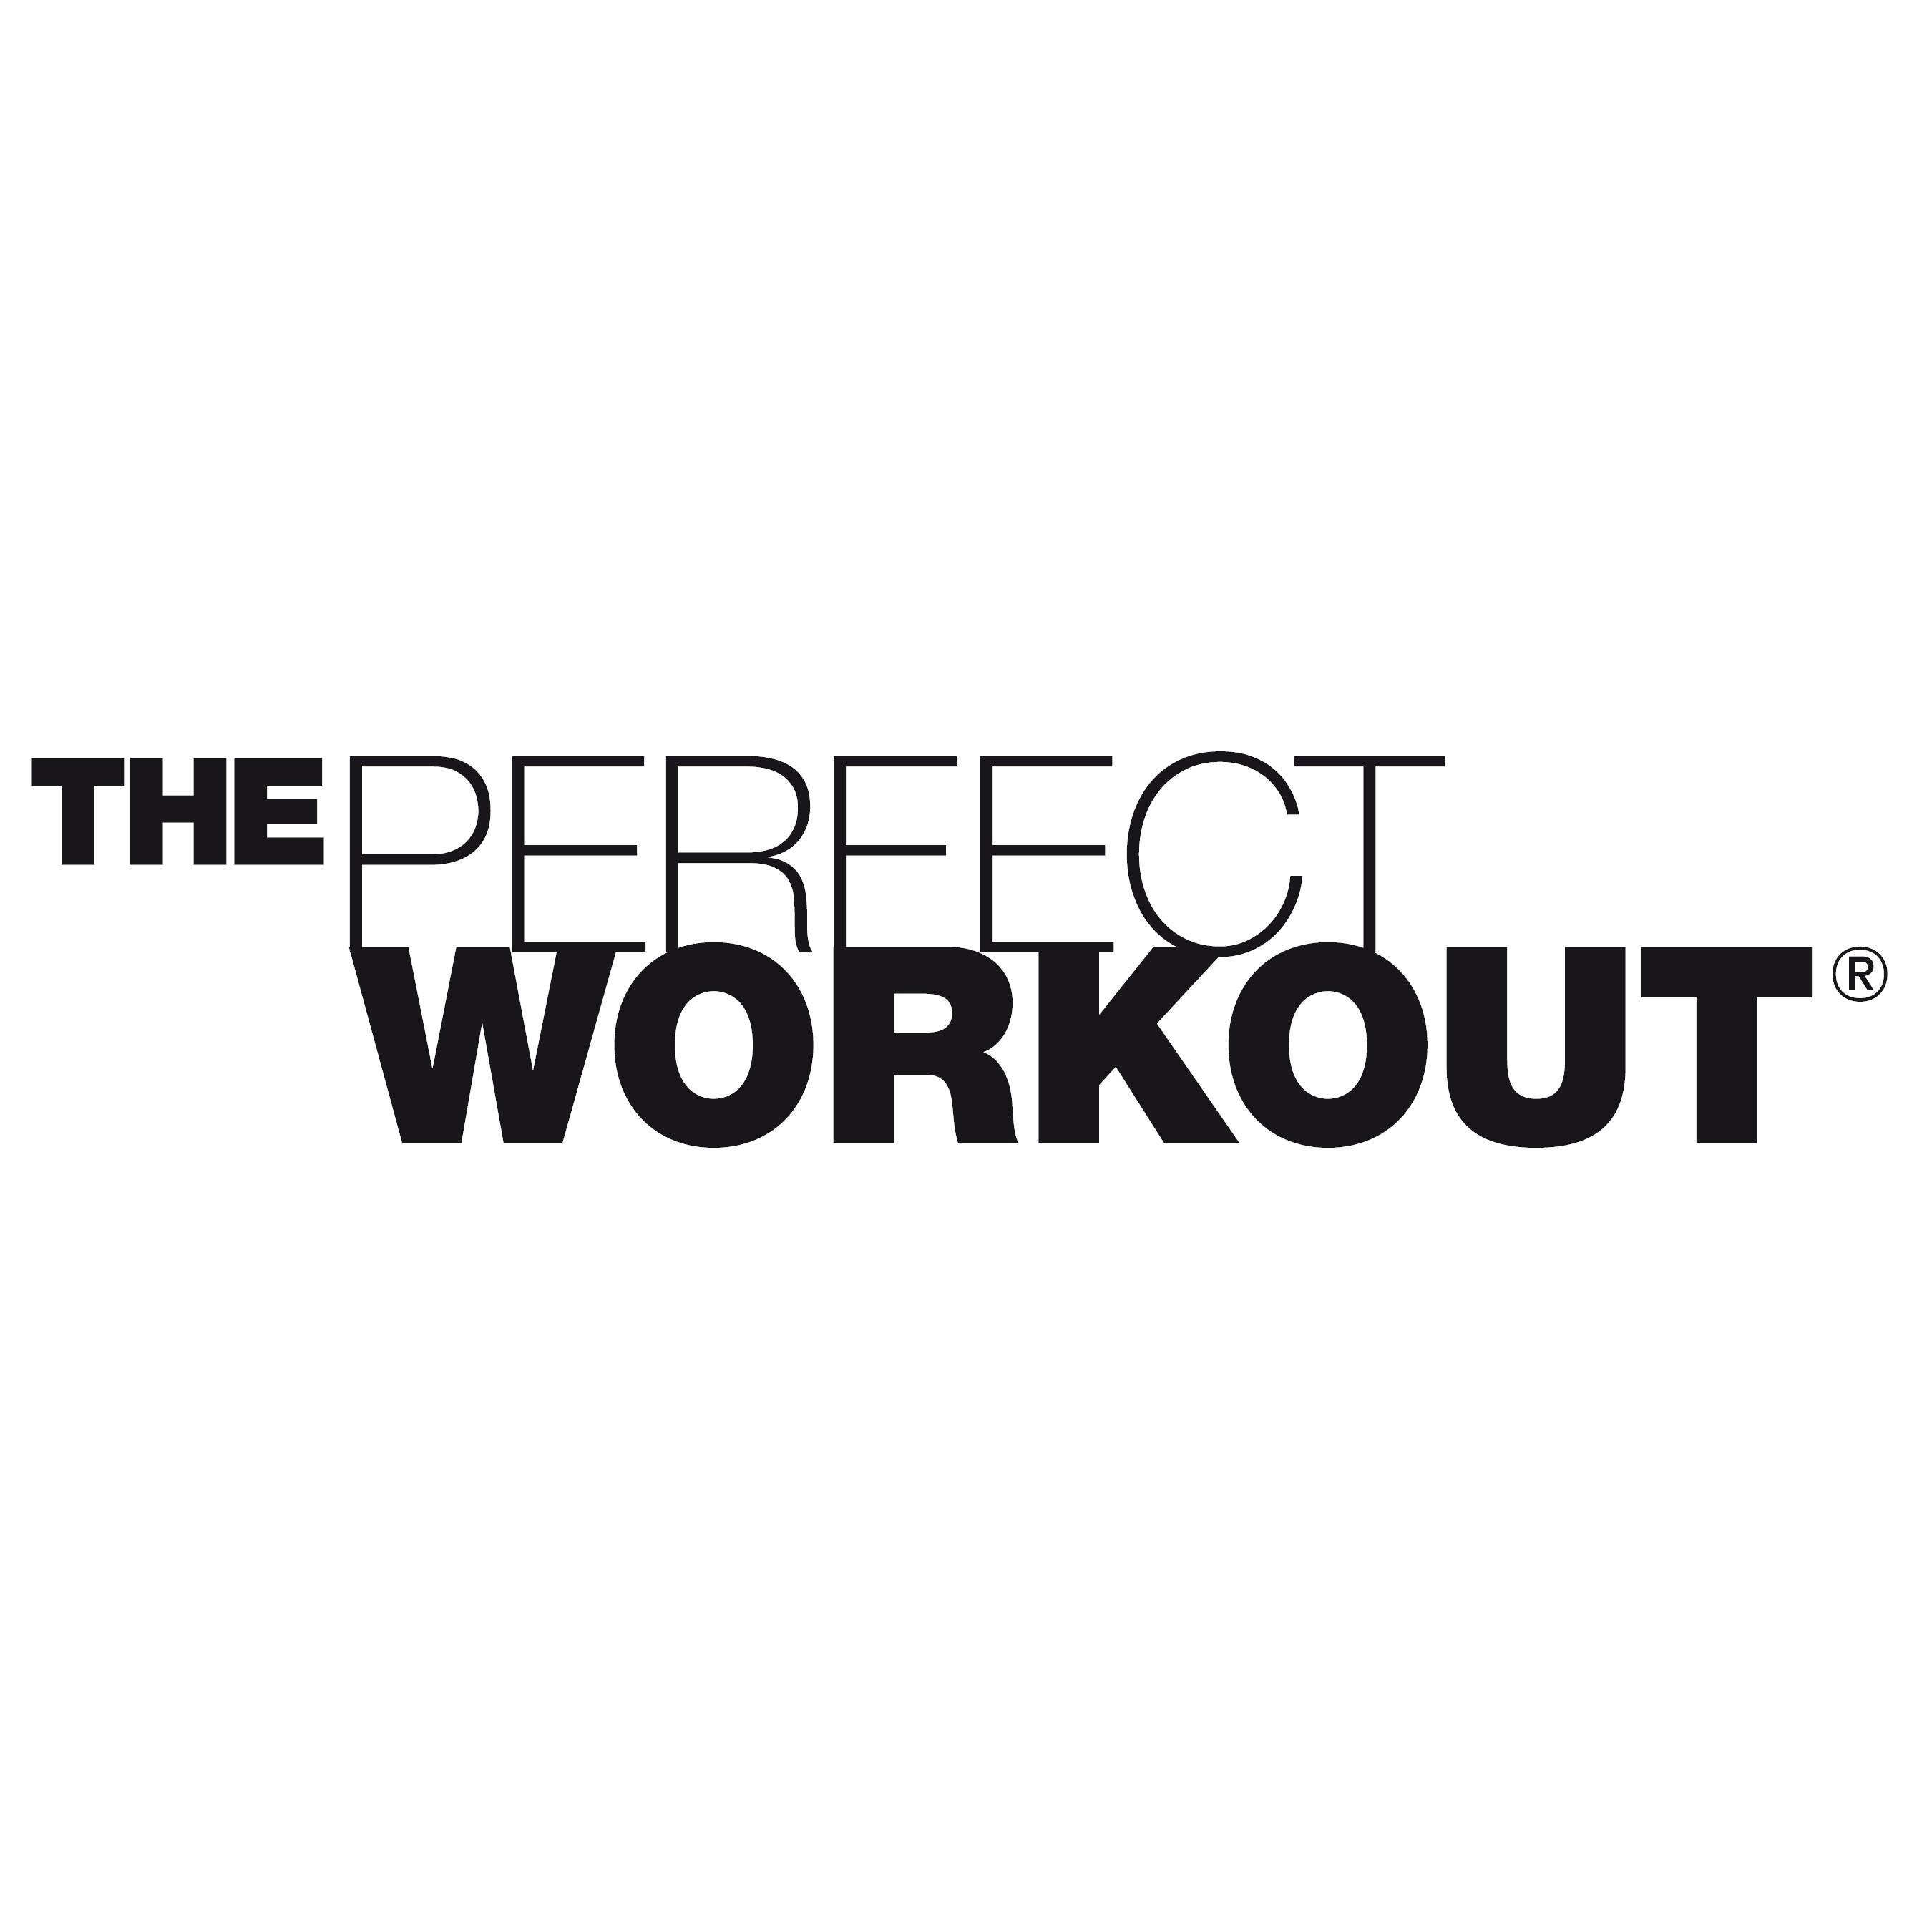 The Perfect Workout - Sunnyvale, CA 94087 - (844)403-1120 | ShowMeLocal.com